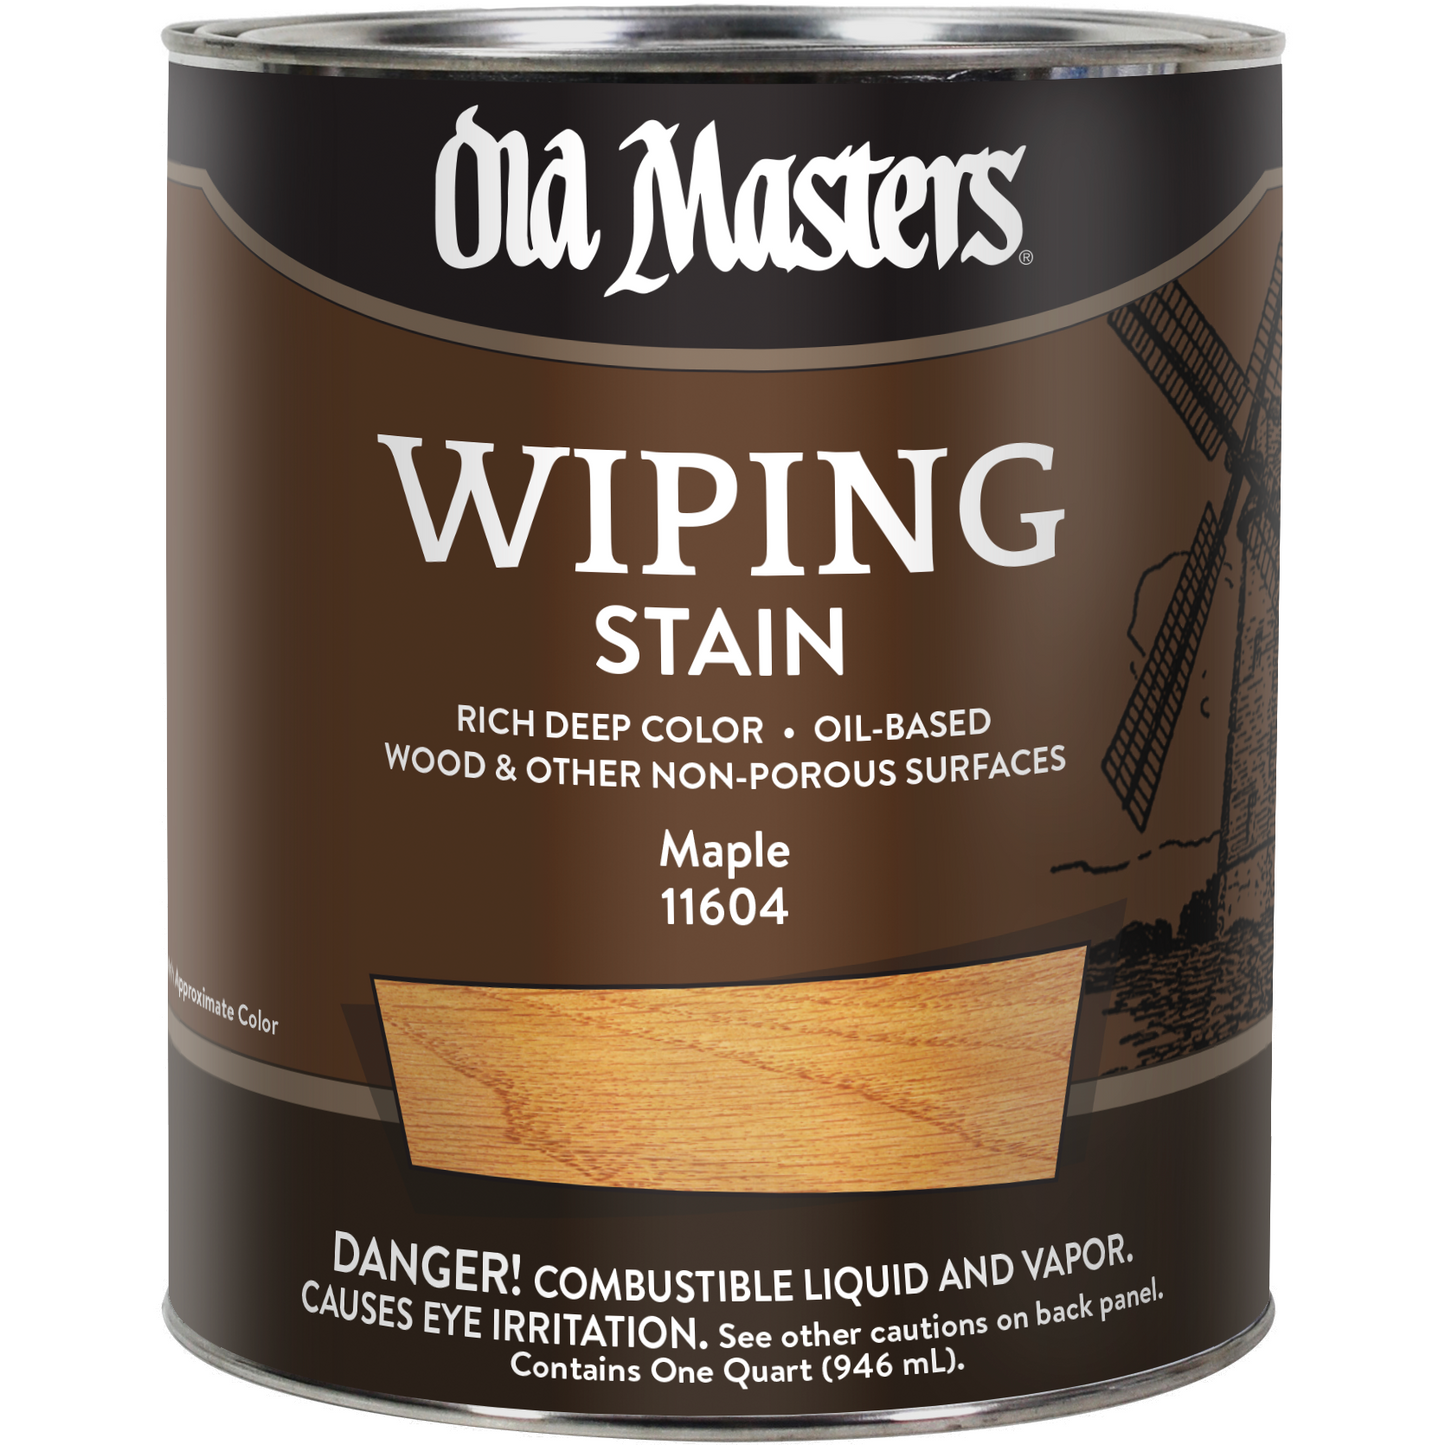 Old Masters Wiping Stain - Maple